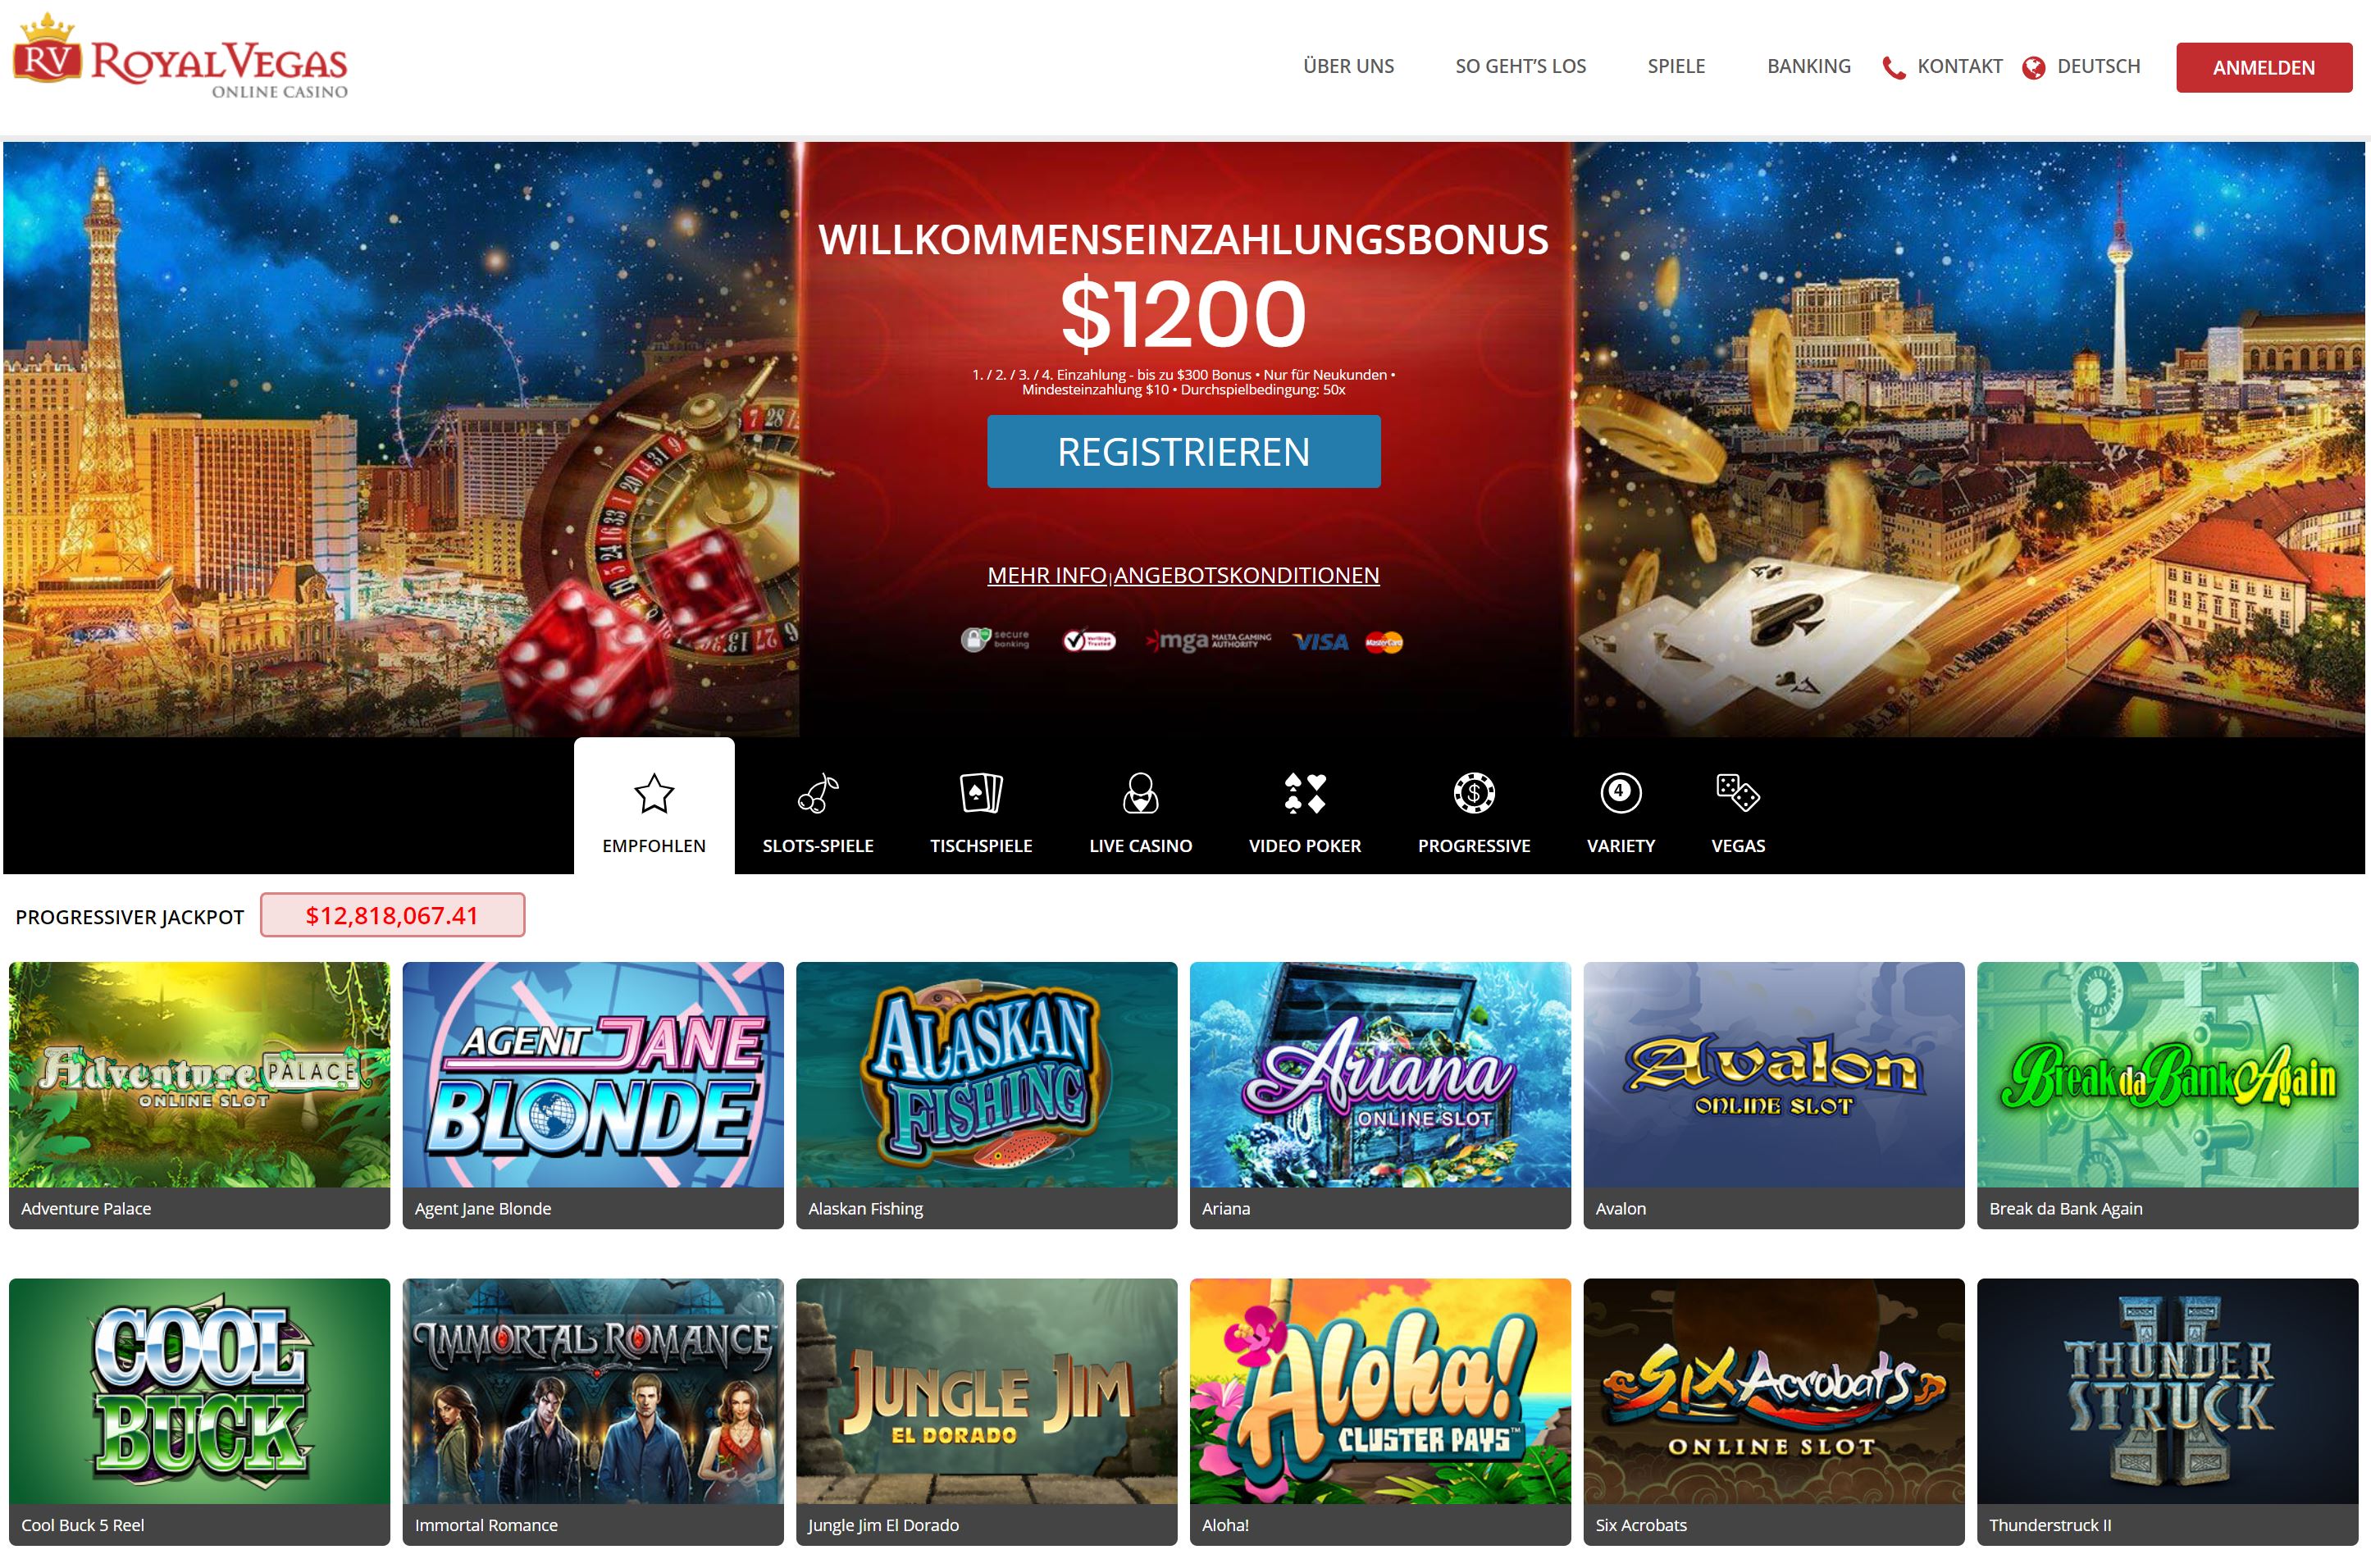  queen of hearts slot machine free play online 